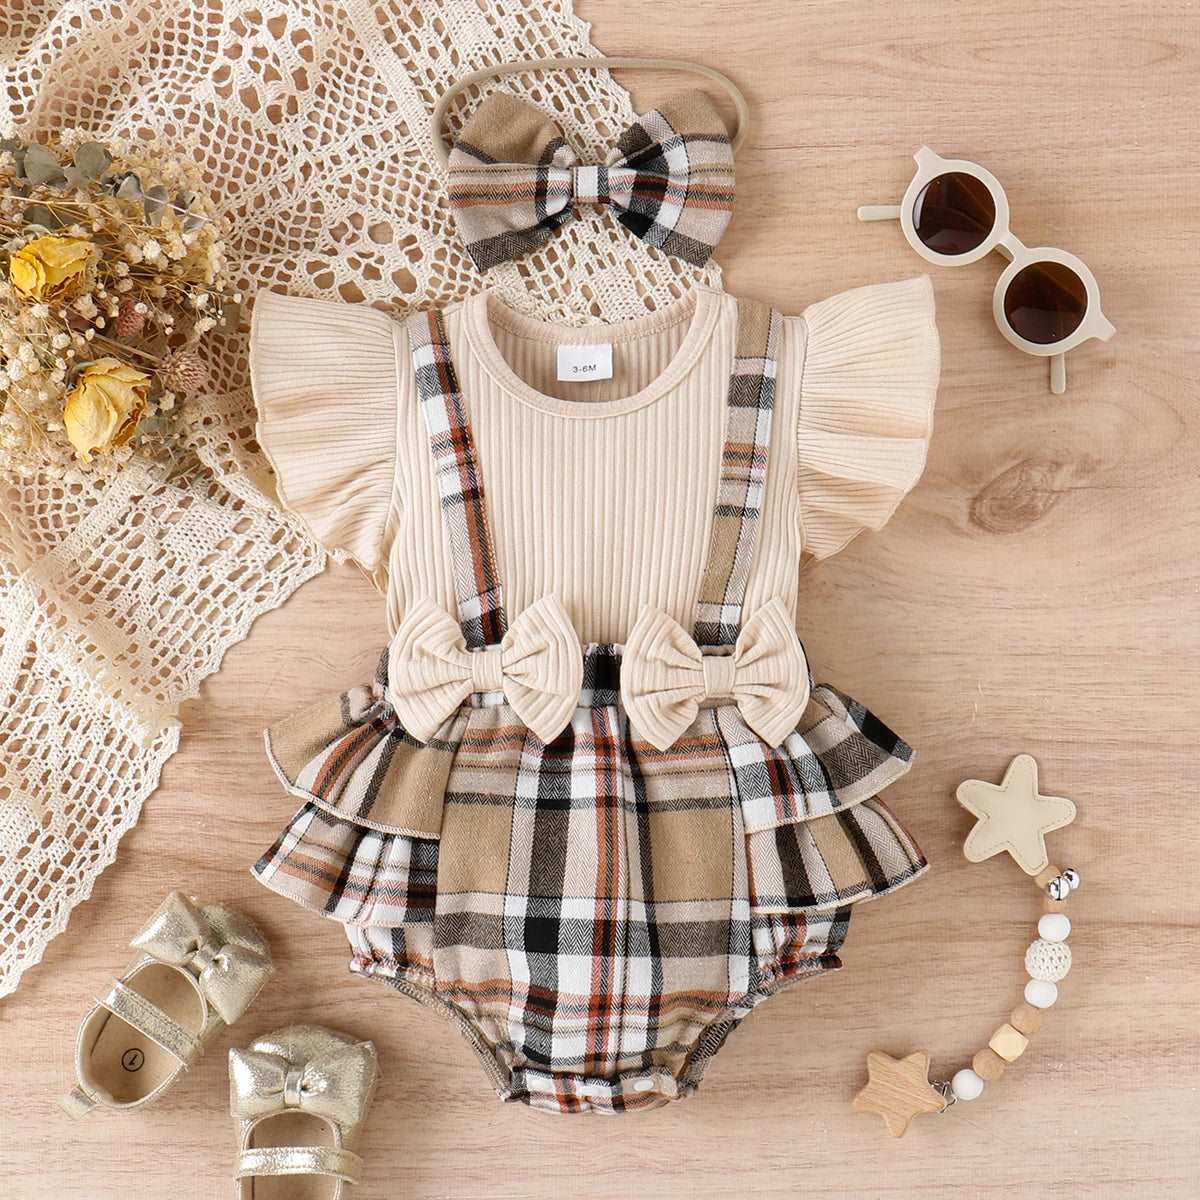 Baby Girls Romper and Headband Set - For all baby